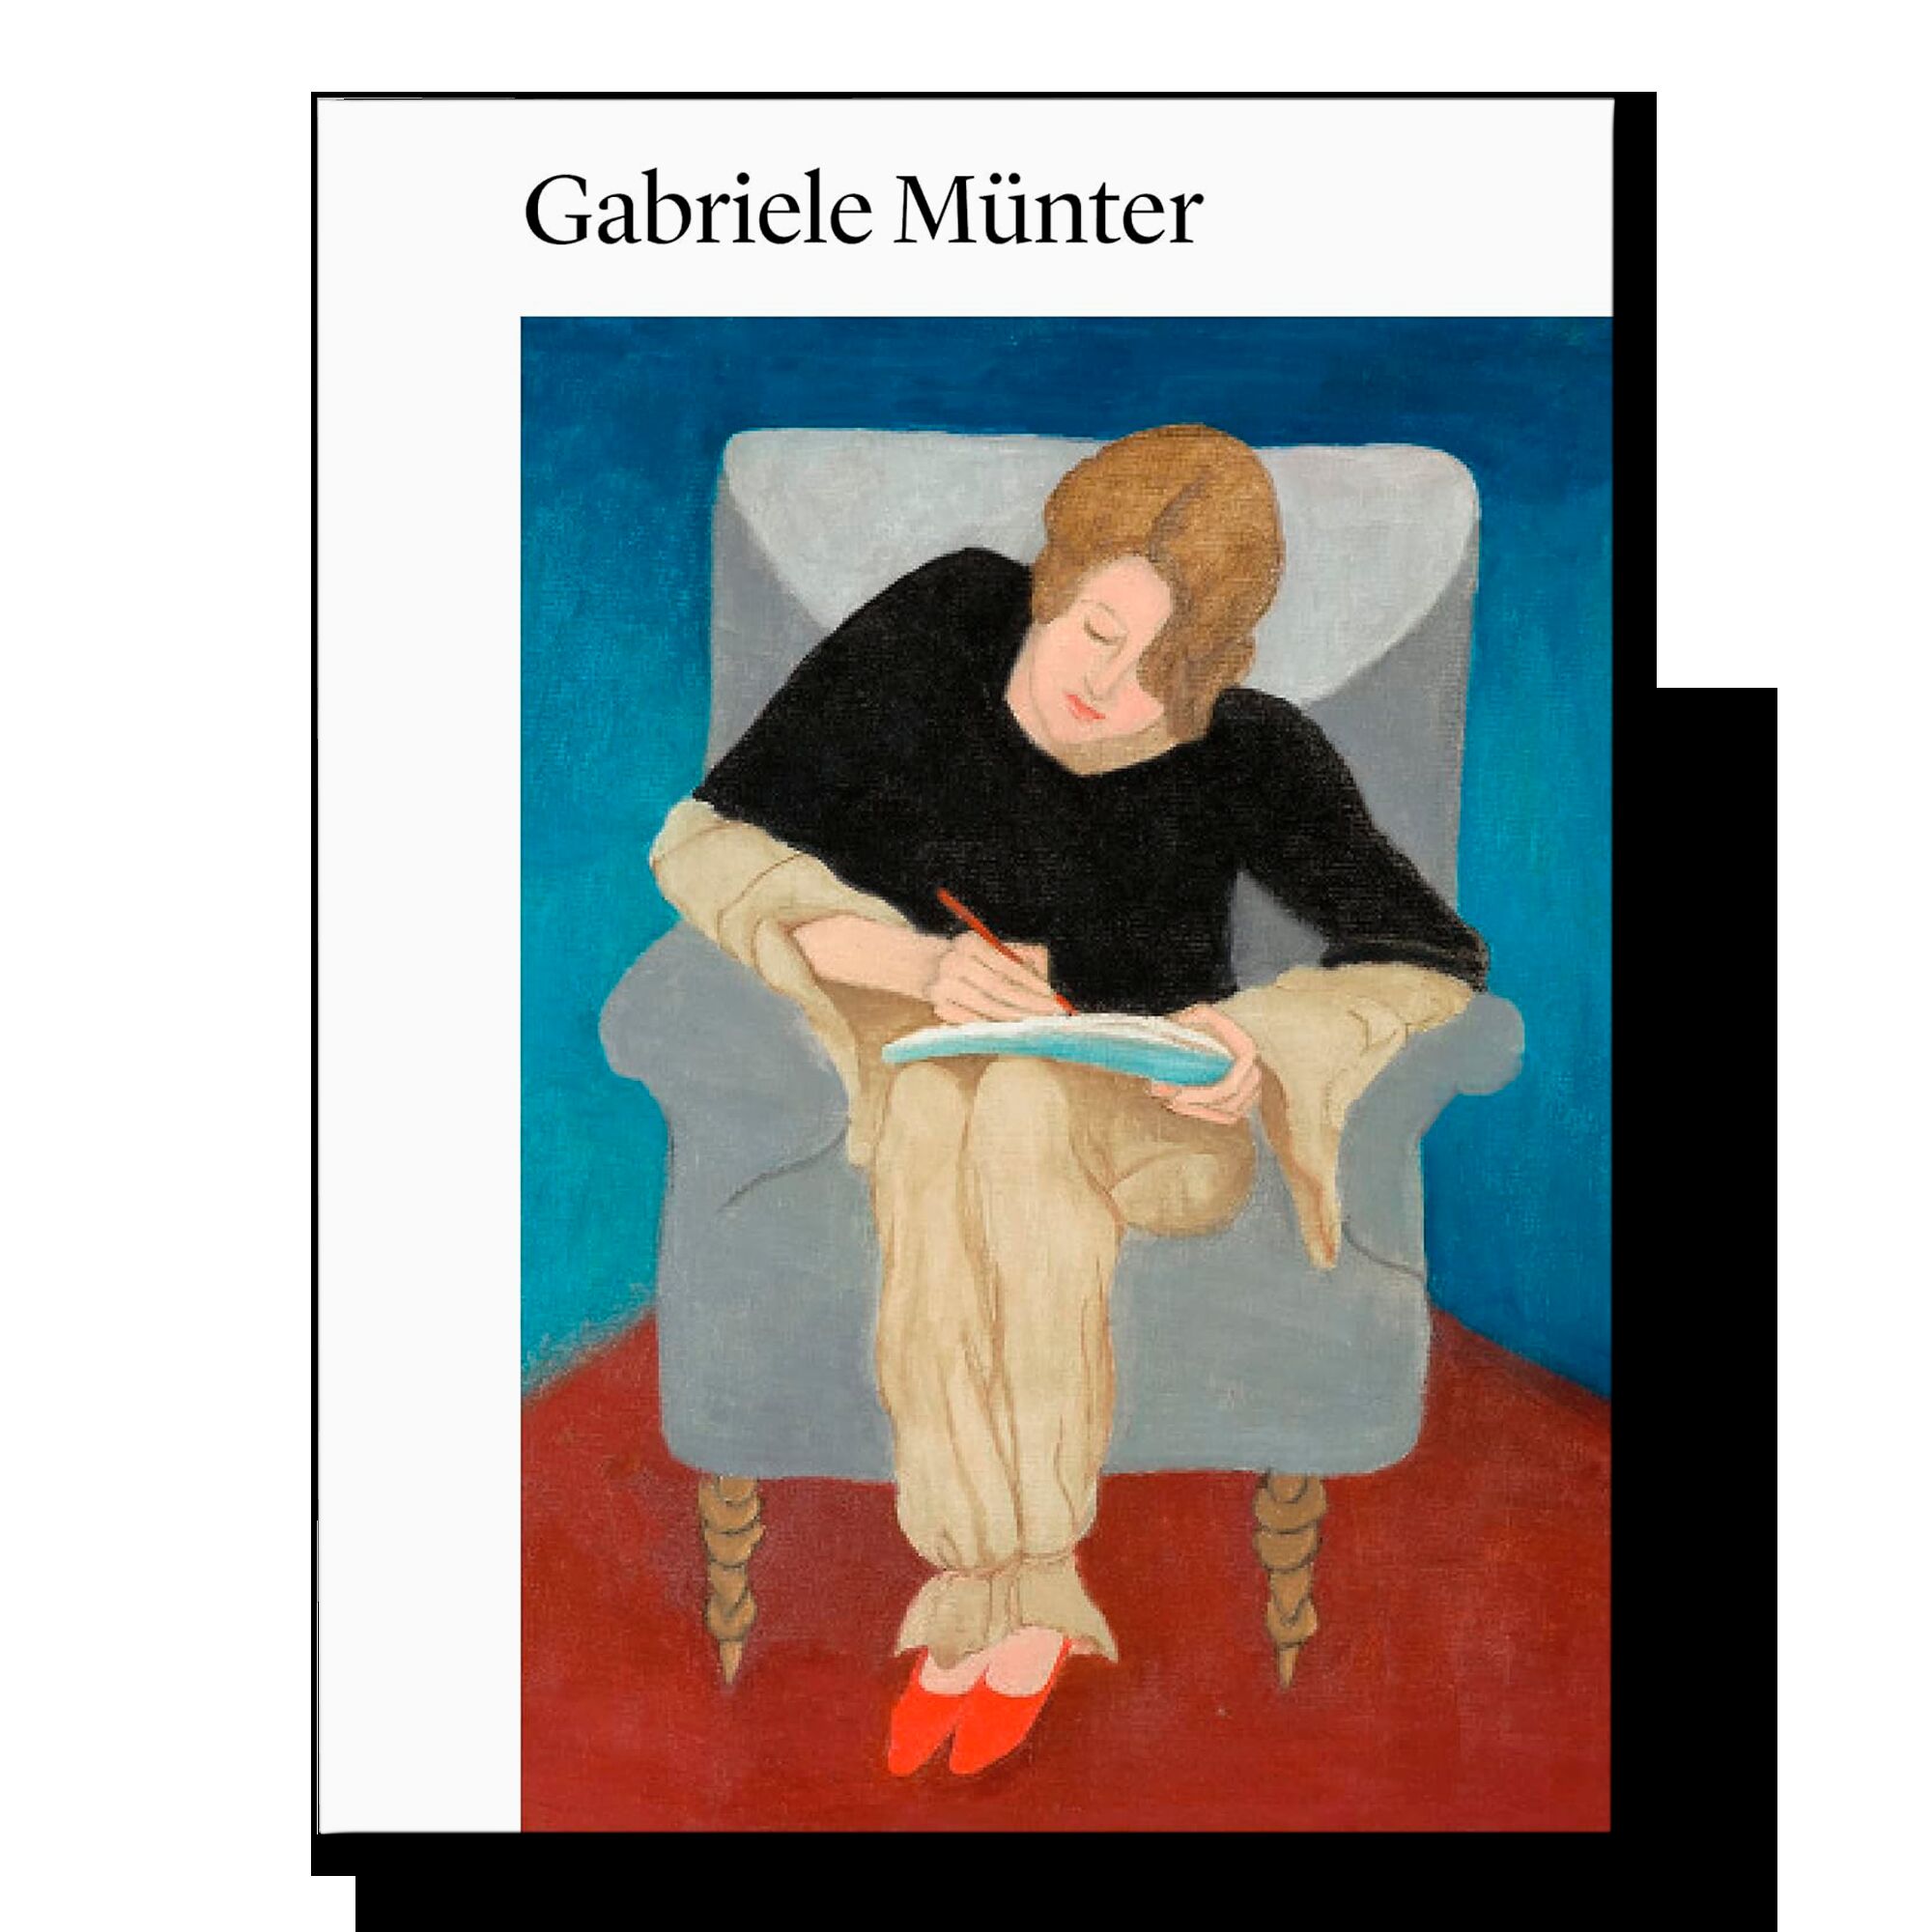 Gabriele Munter: Painting to the Point